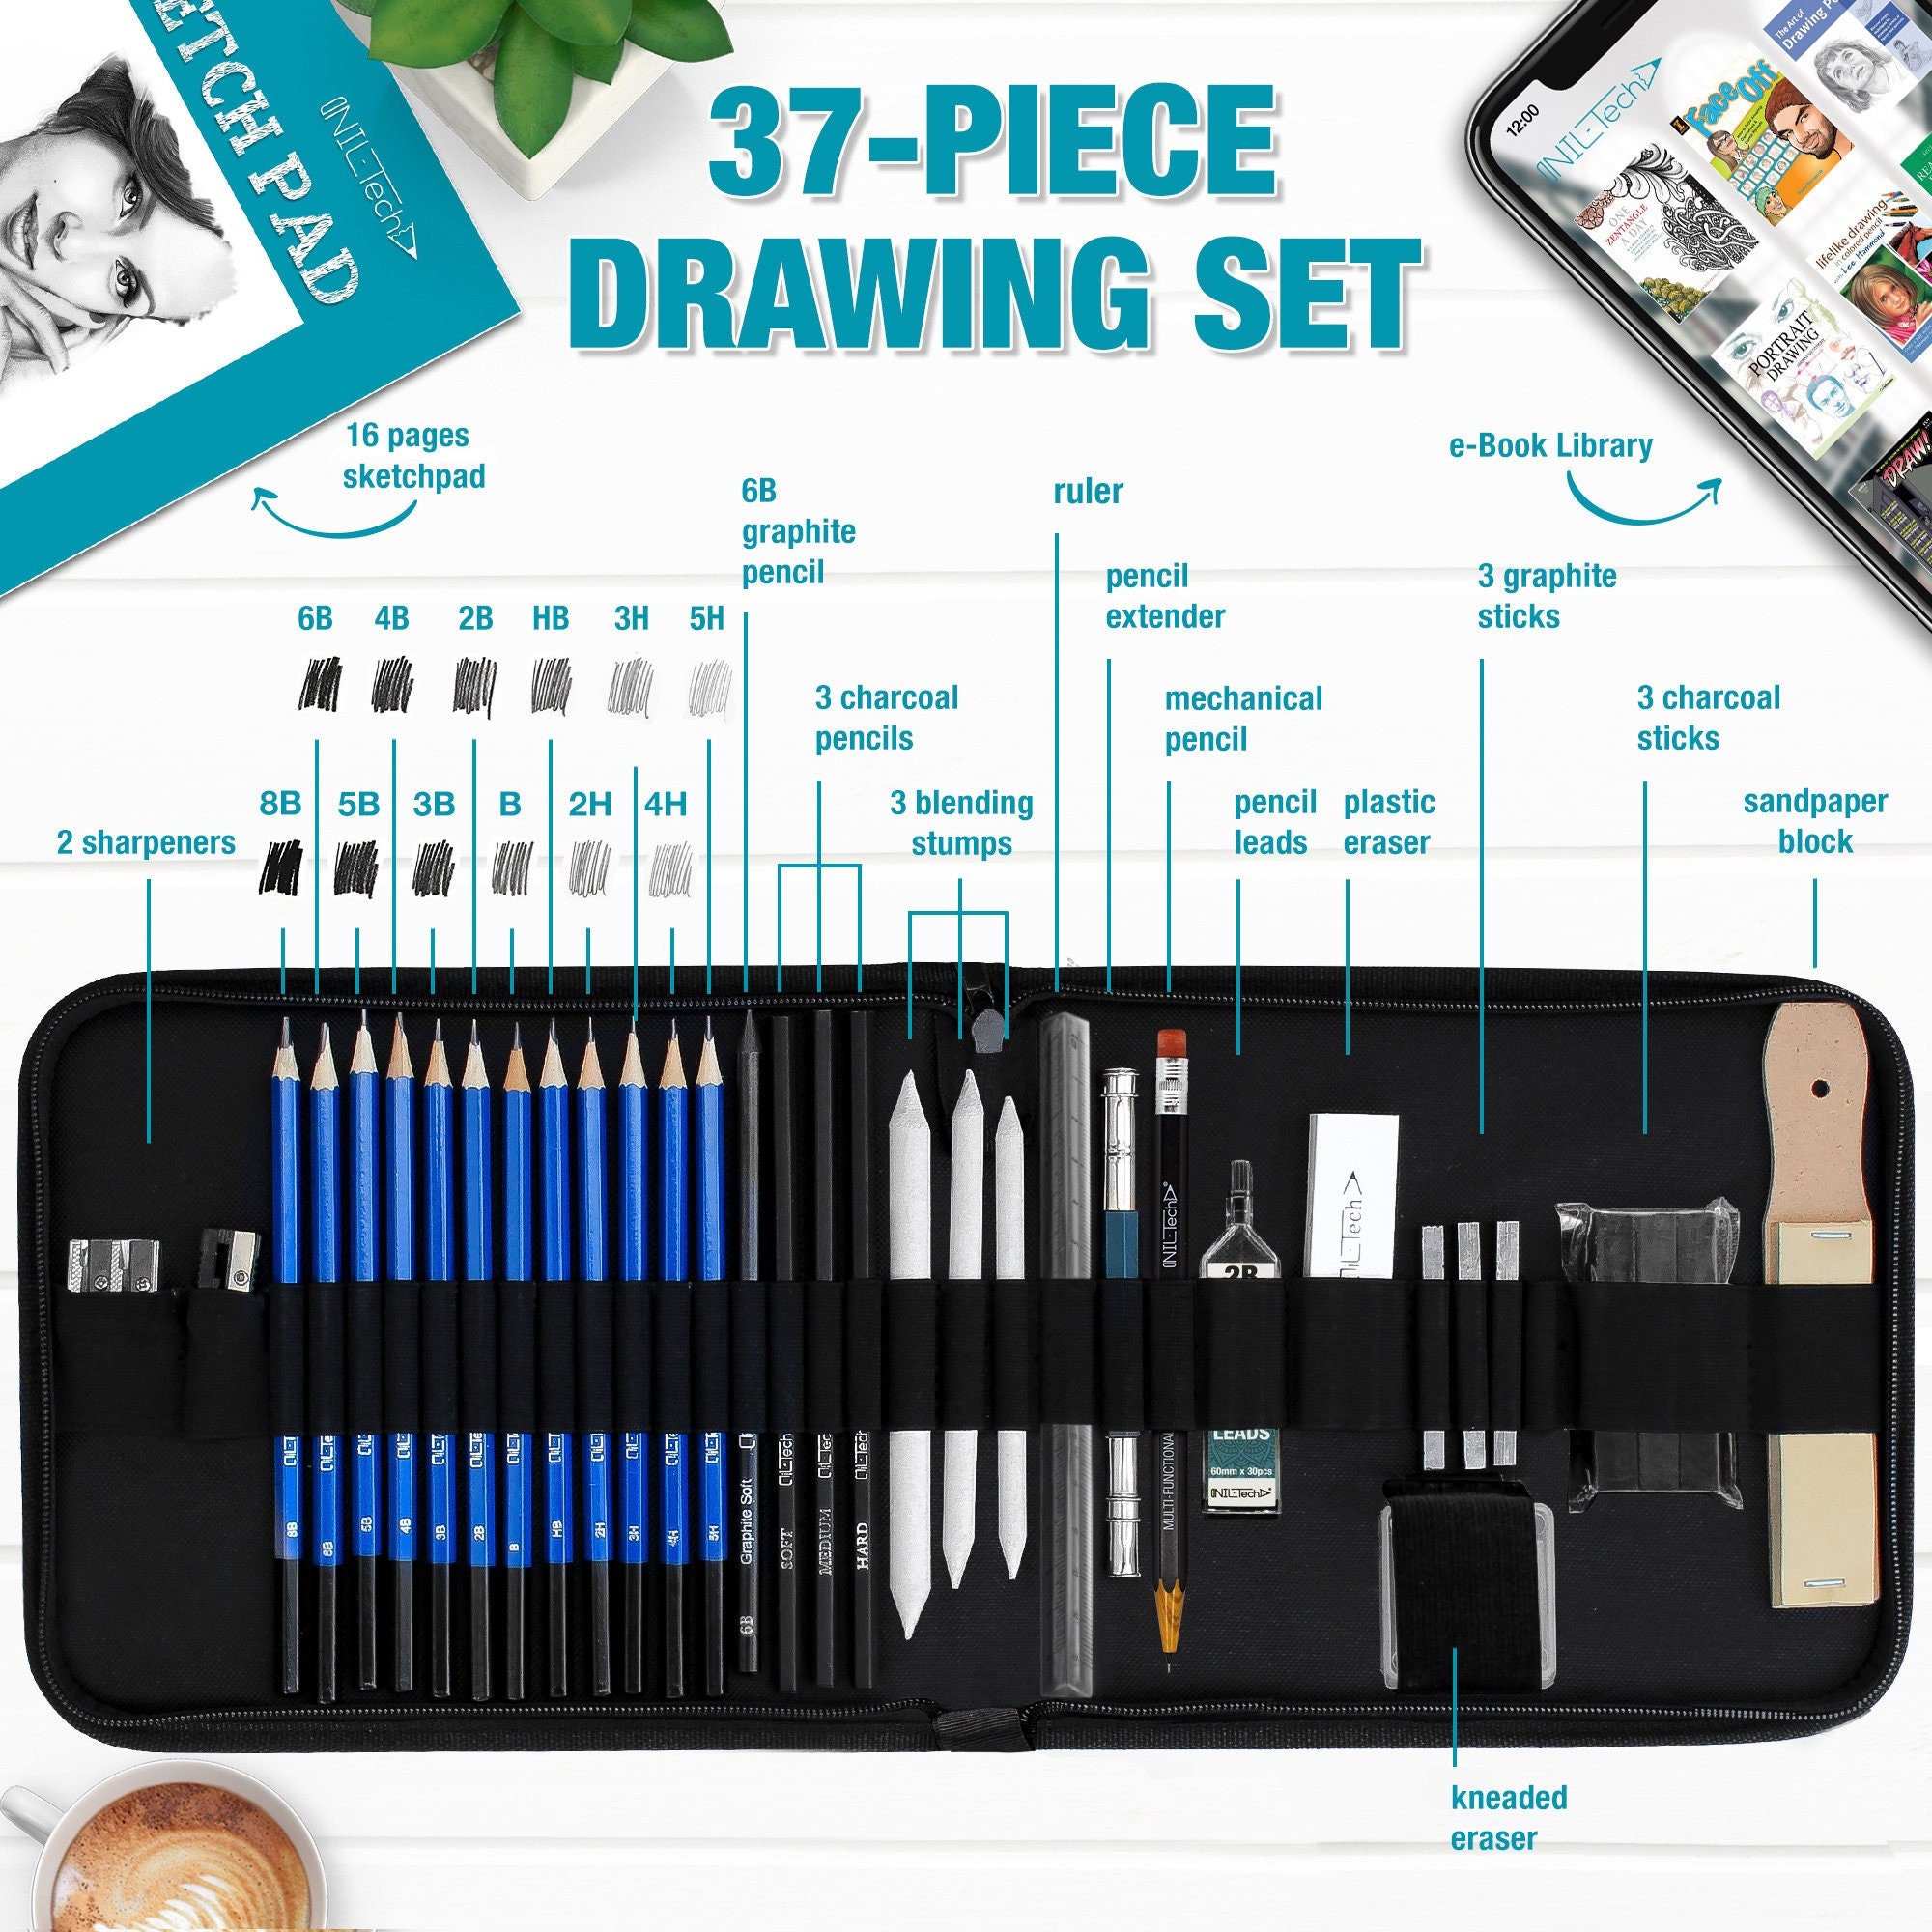 Norberg & Linden Drawing Set - Sketching and Charcoal Pencils - 100 Page Drawing Pad, Kneaded eraser. Art Kit and Supplies for Kids, Teens and Adults